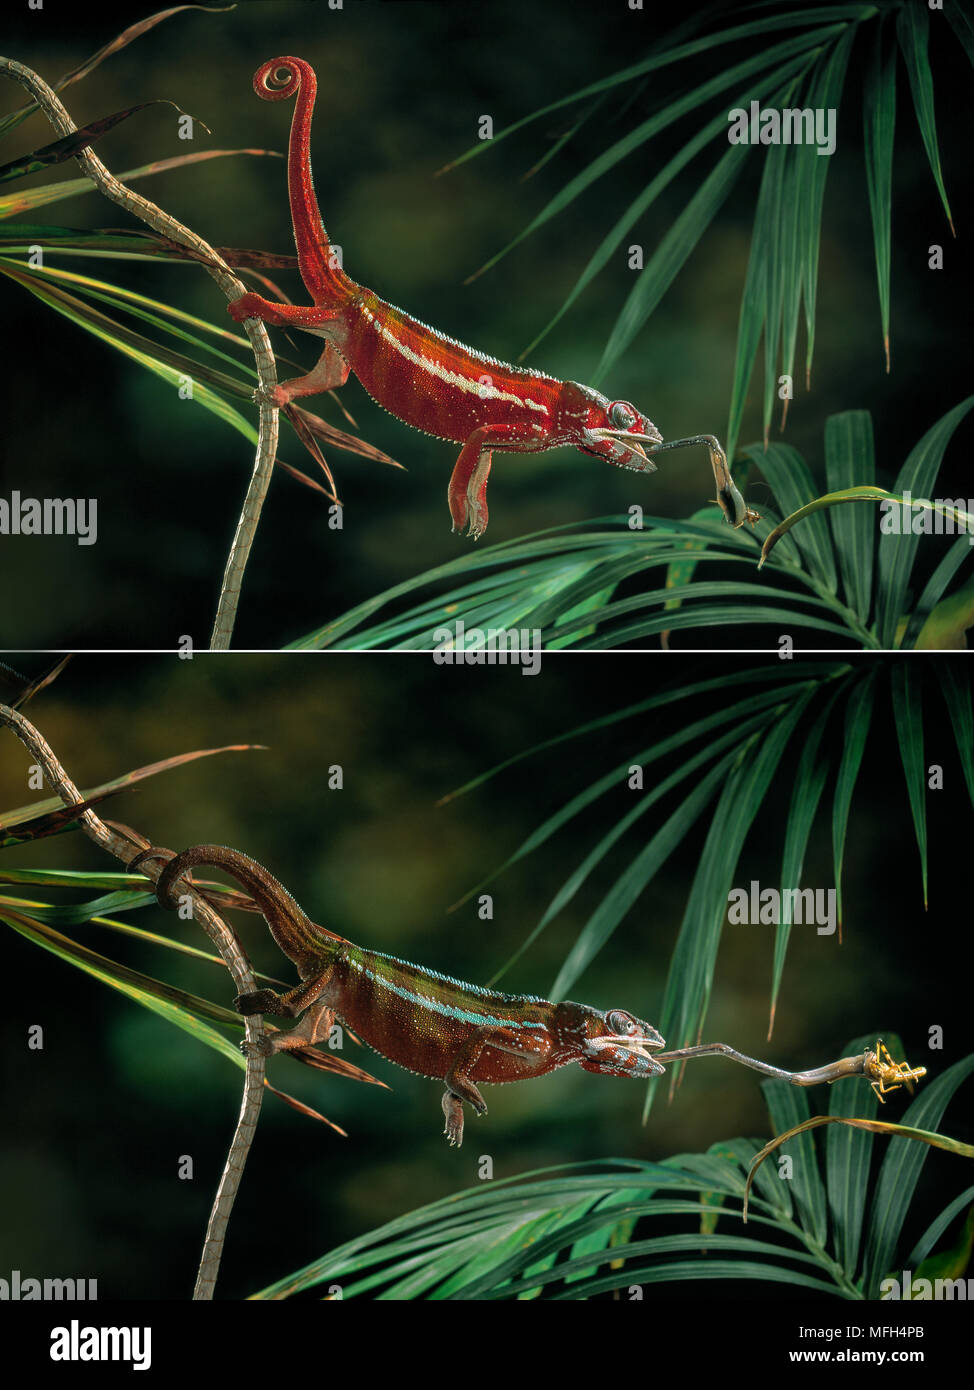 PANTHER CHAMELEON Chamaeleo pardalis catching insect prey sequence Image carries 50% surcharge Stock Photo